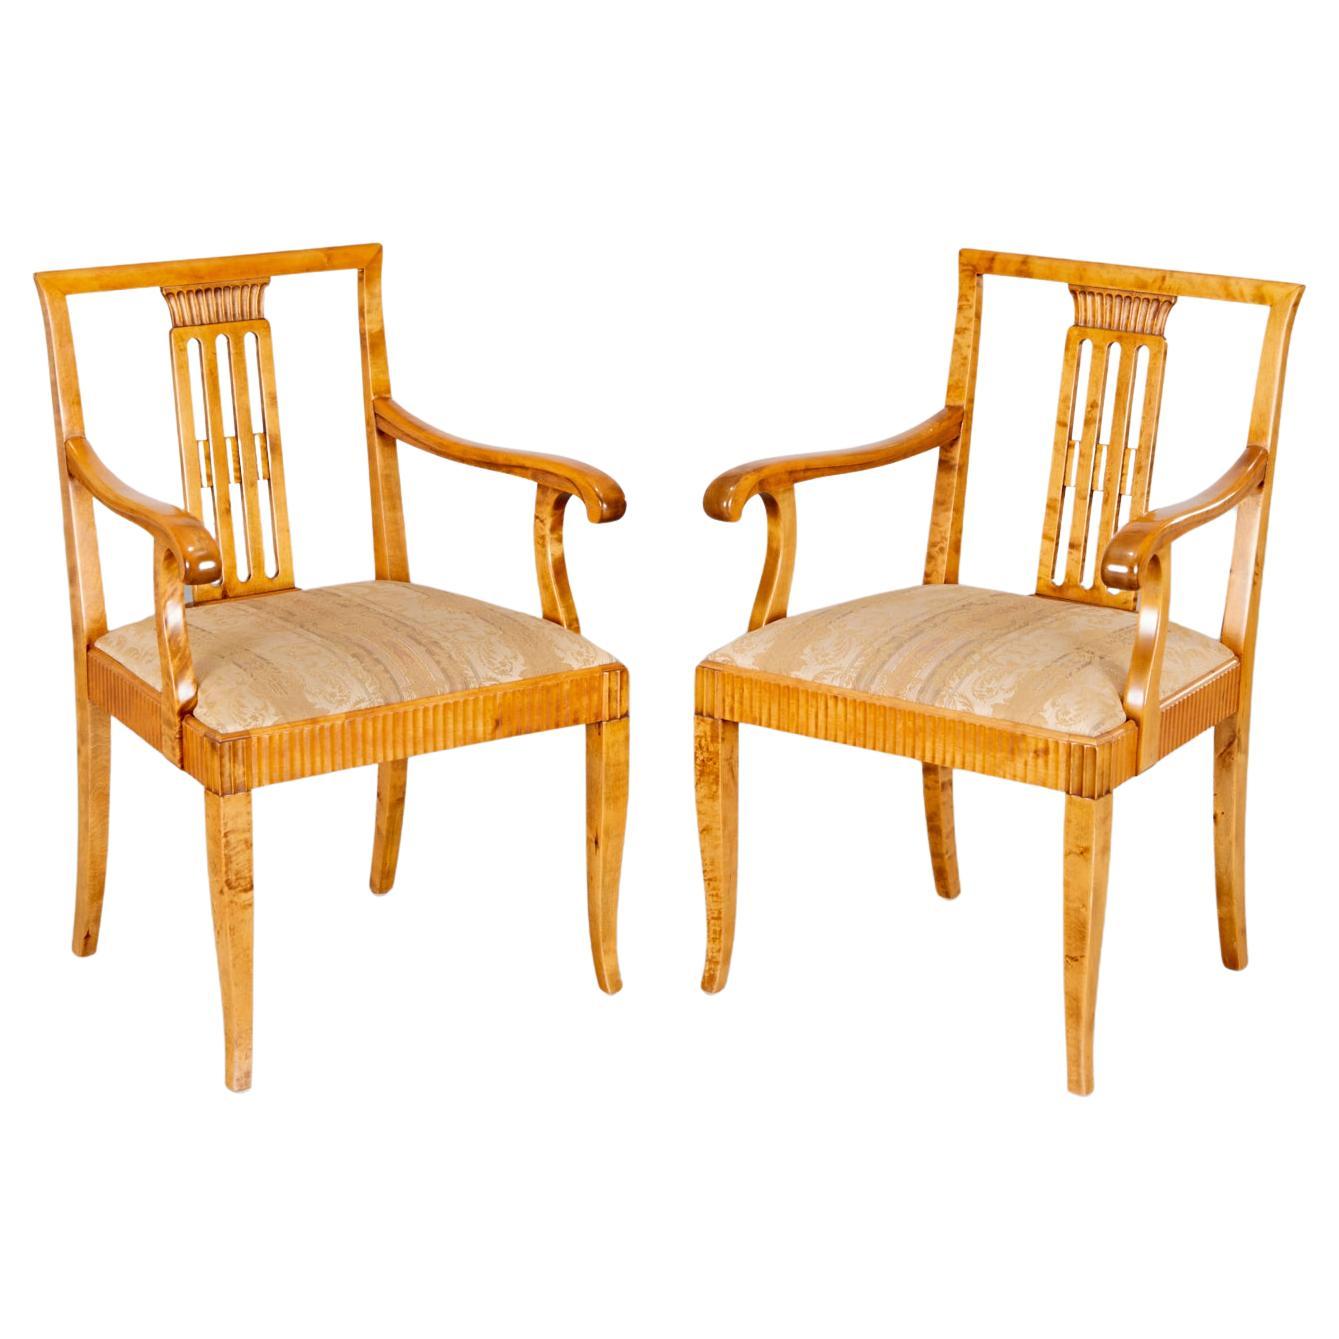 20th c. Pair of Swedish Neoclassical Birch Armchairs with Damask Upholstery For Sale